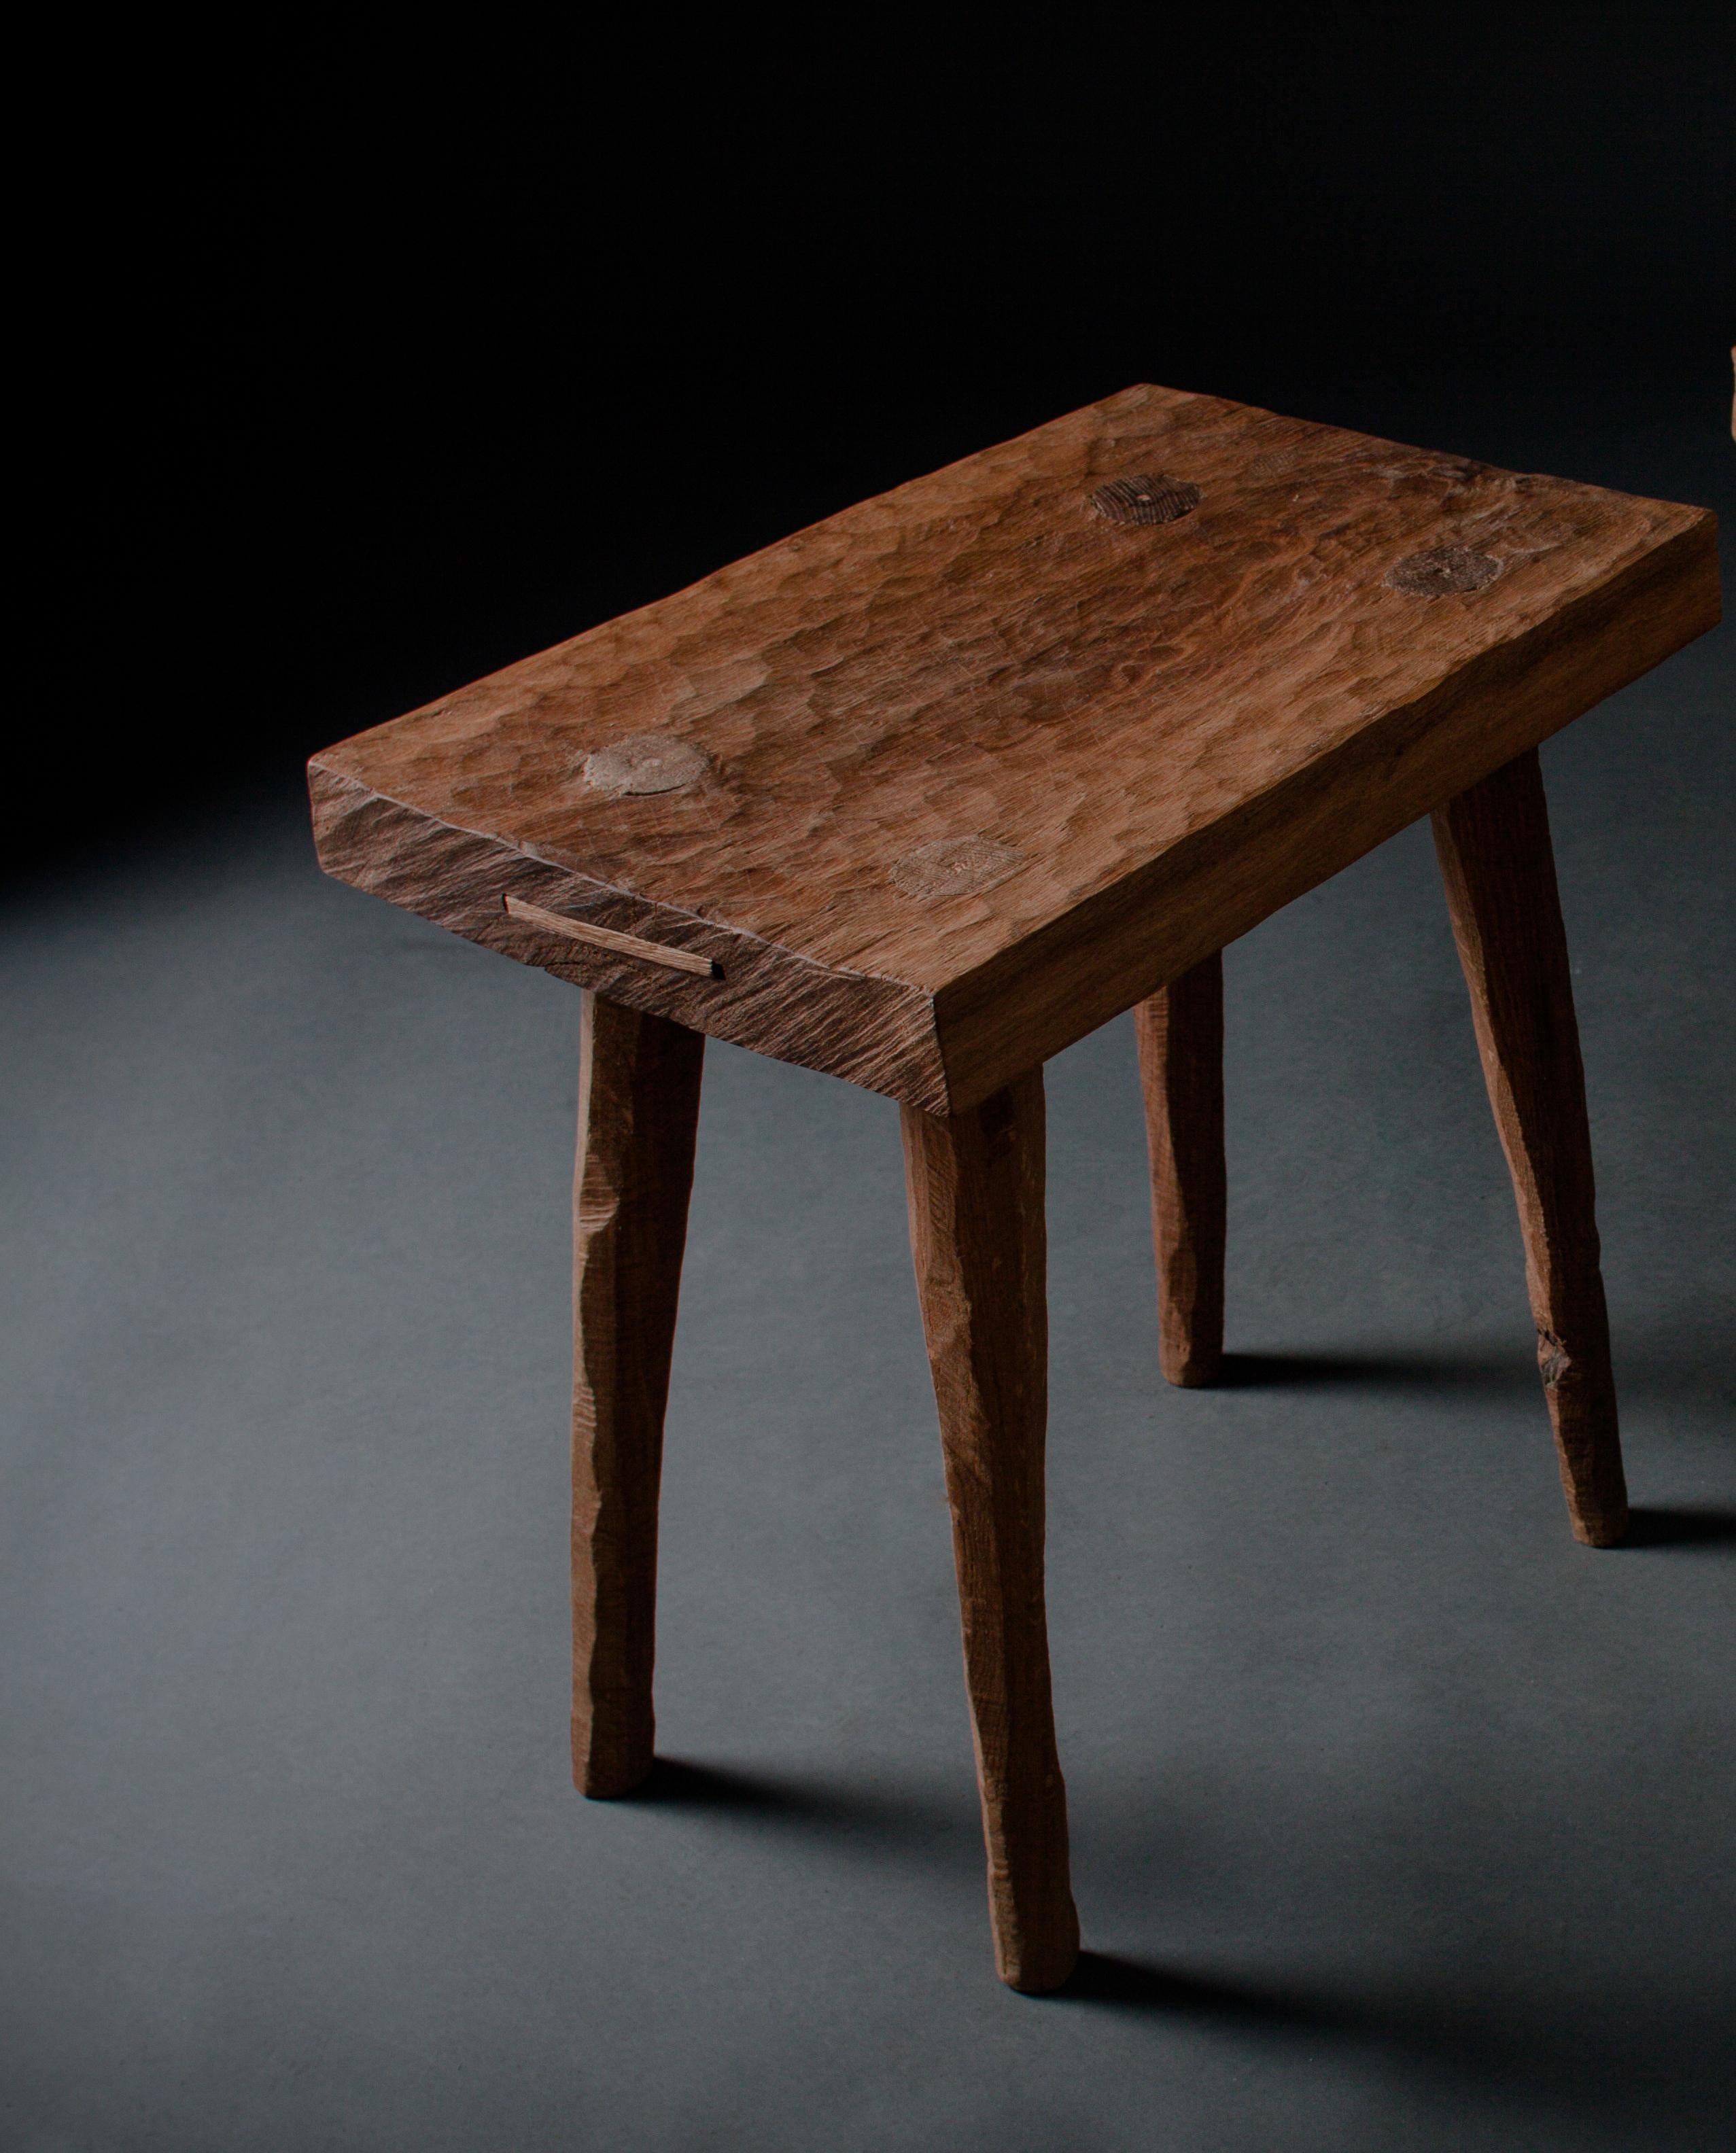 Stools made of solid oak (+ linseed oil)
Measures: 45 x 41 x 36 cm.

SÓHA design studio conceives and produces furniture design and decorative objects in solid oak in an authentic style. Inspiration to create all these items comes from the Russian